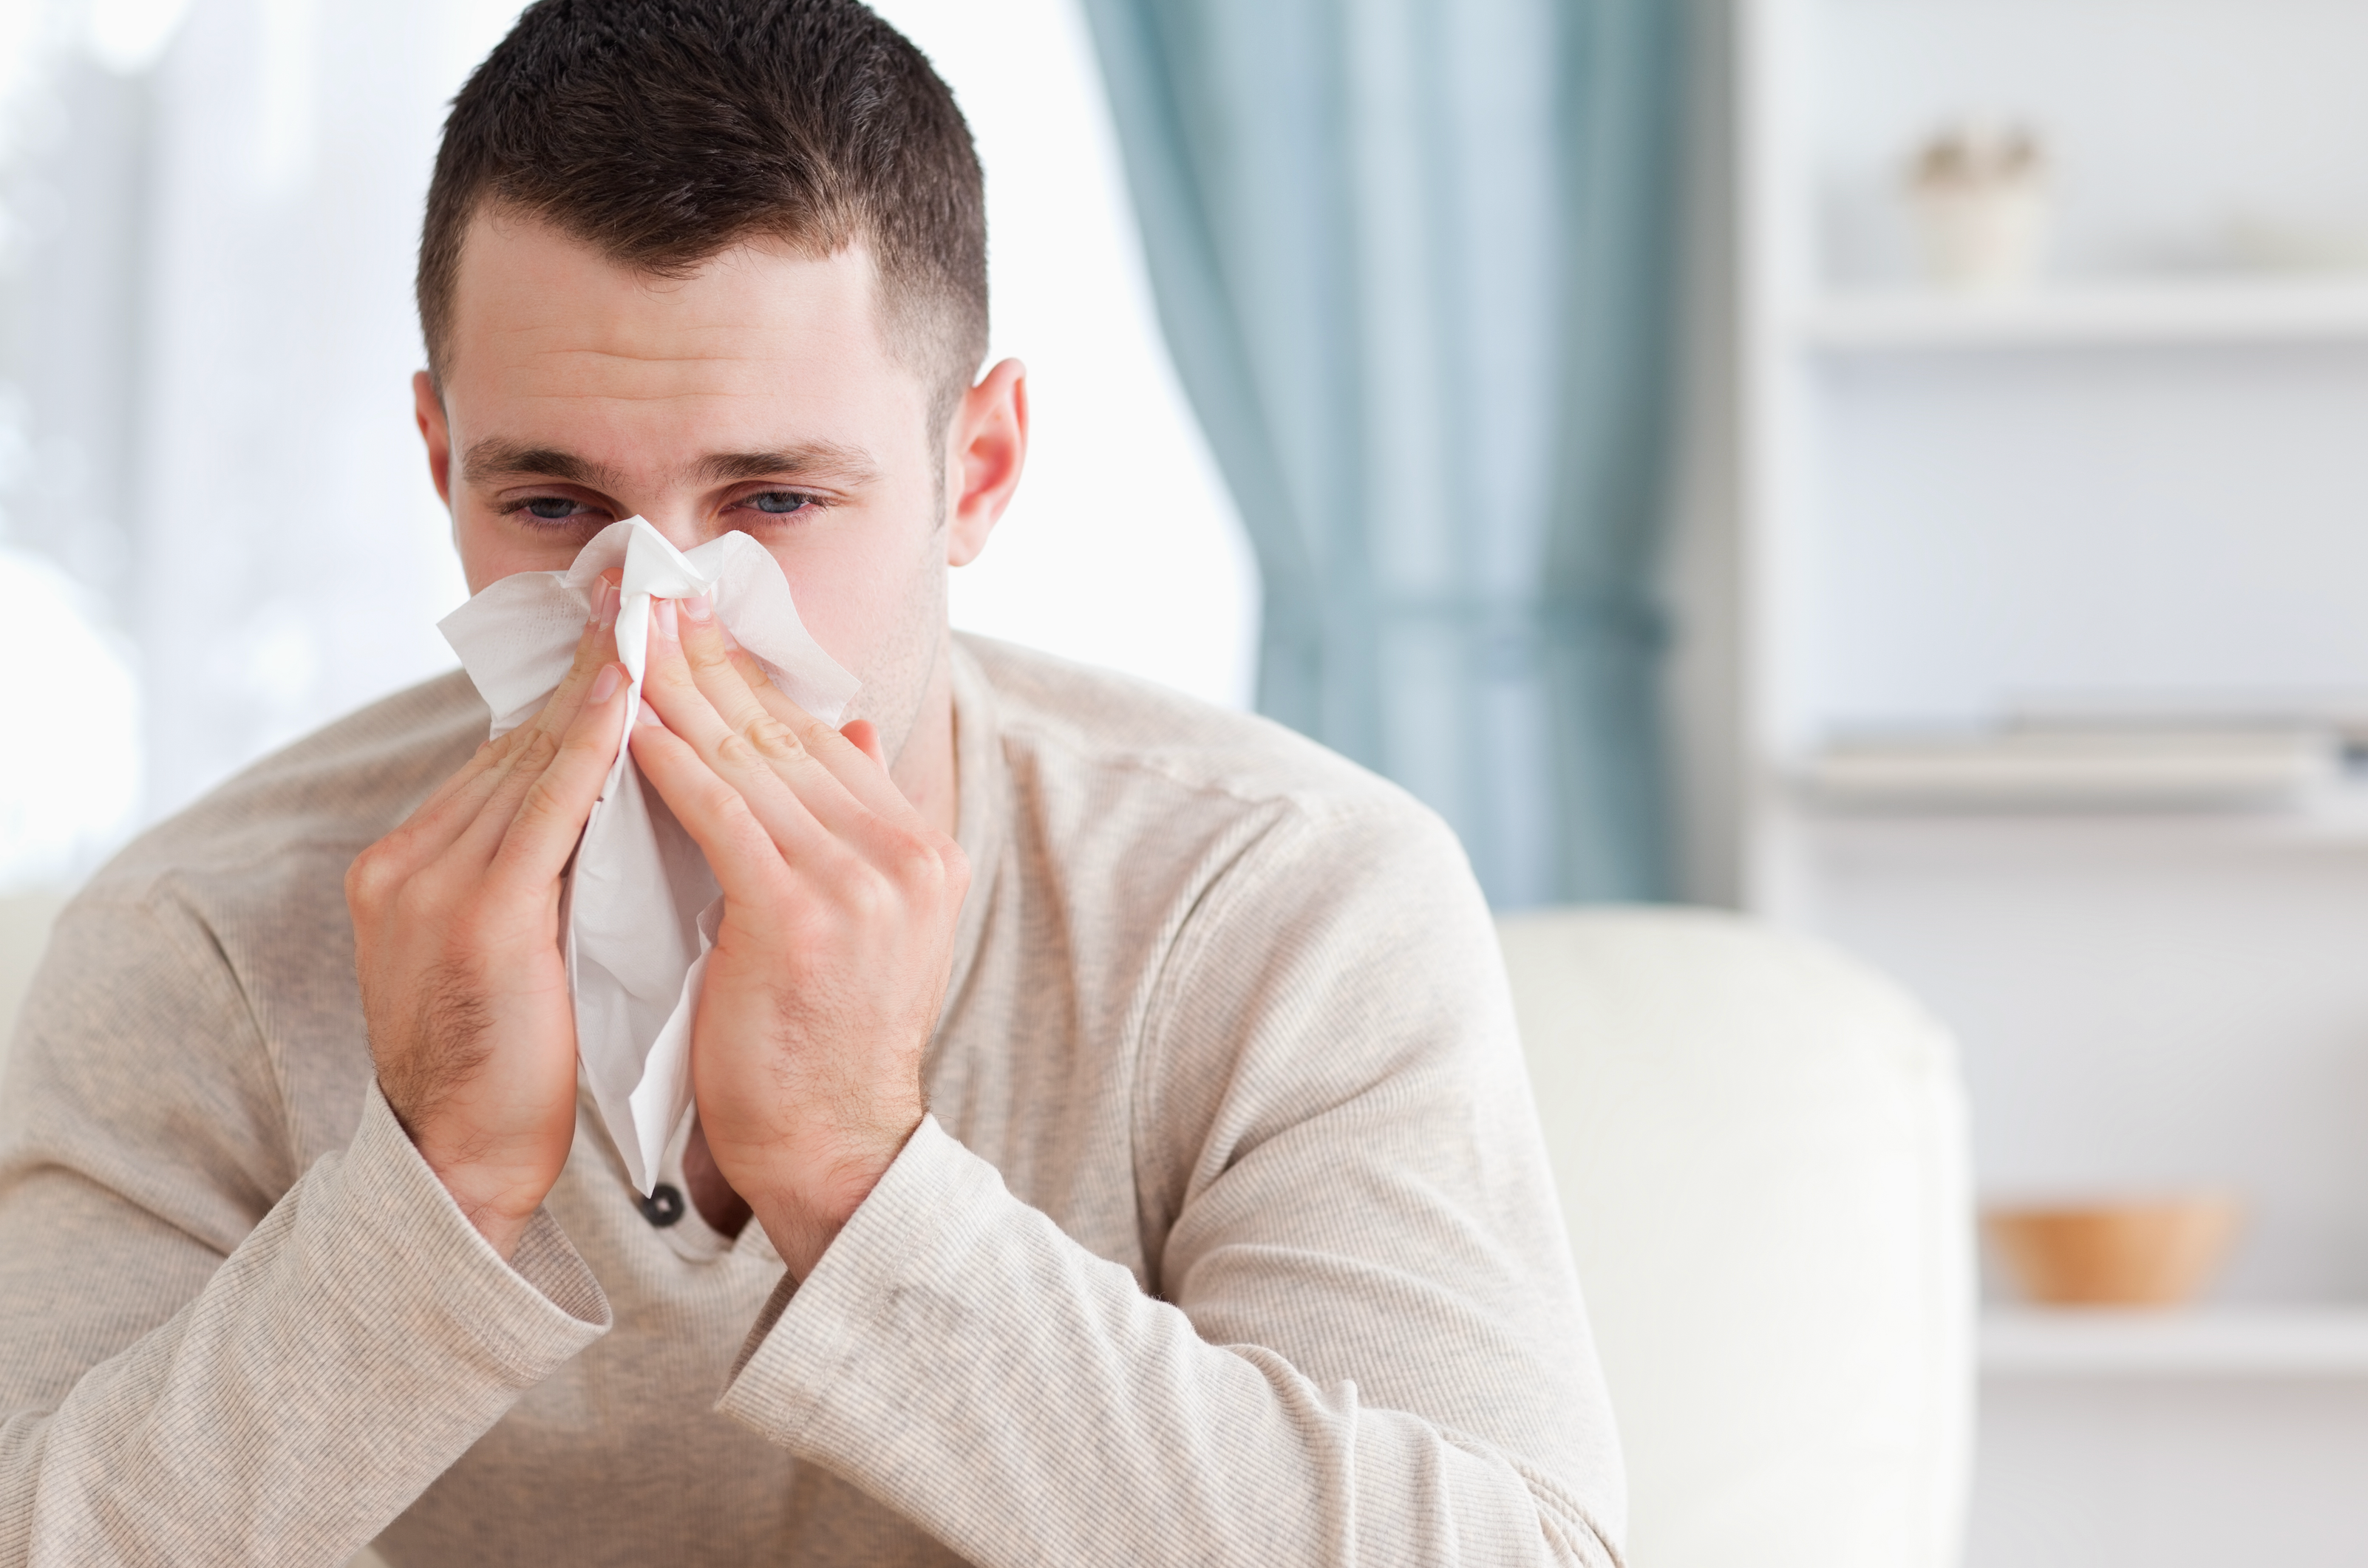 Top tips to support our immunity this cold and flu season